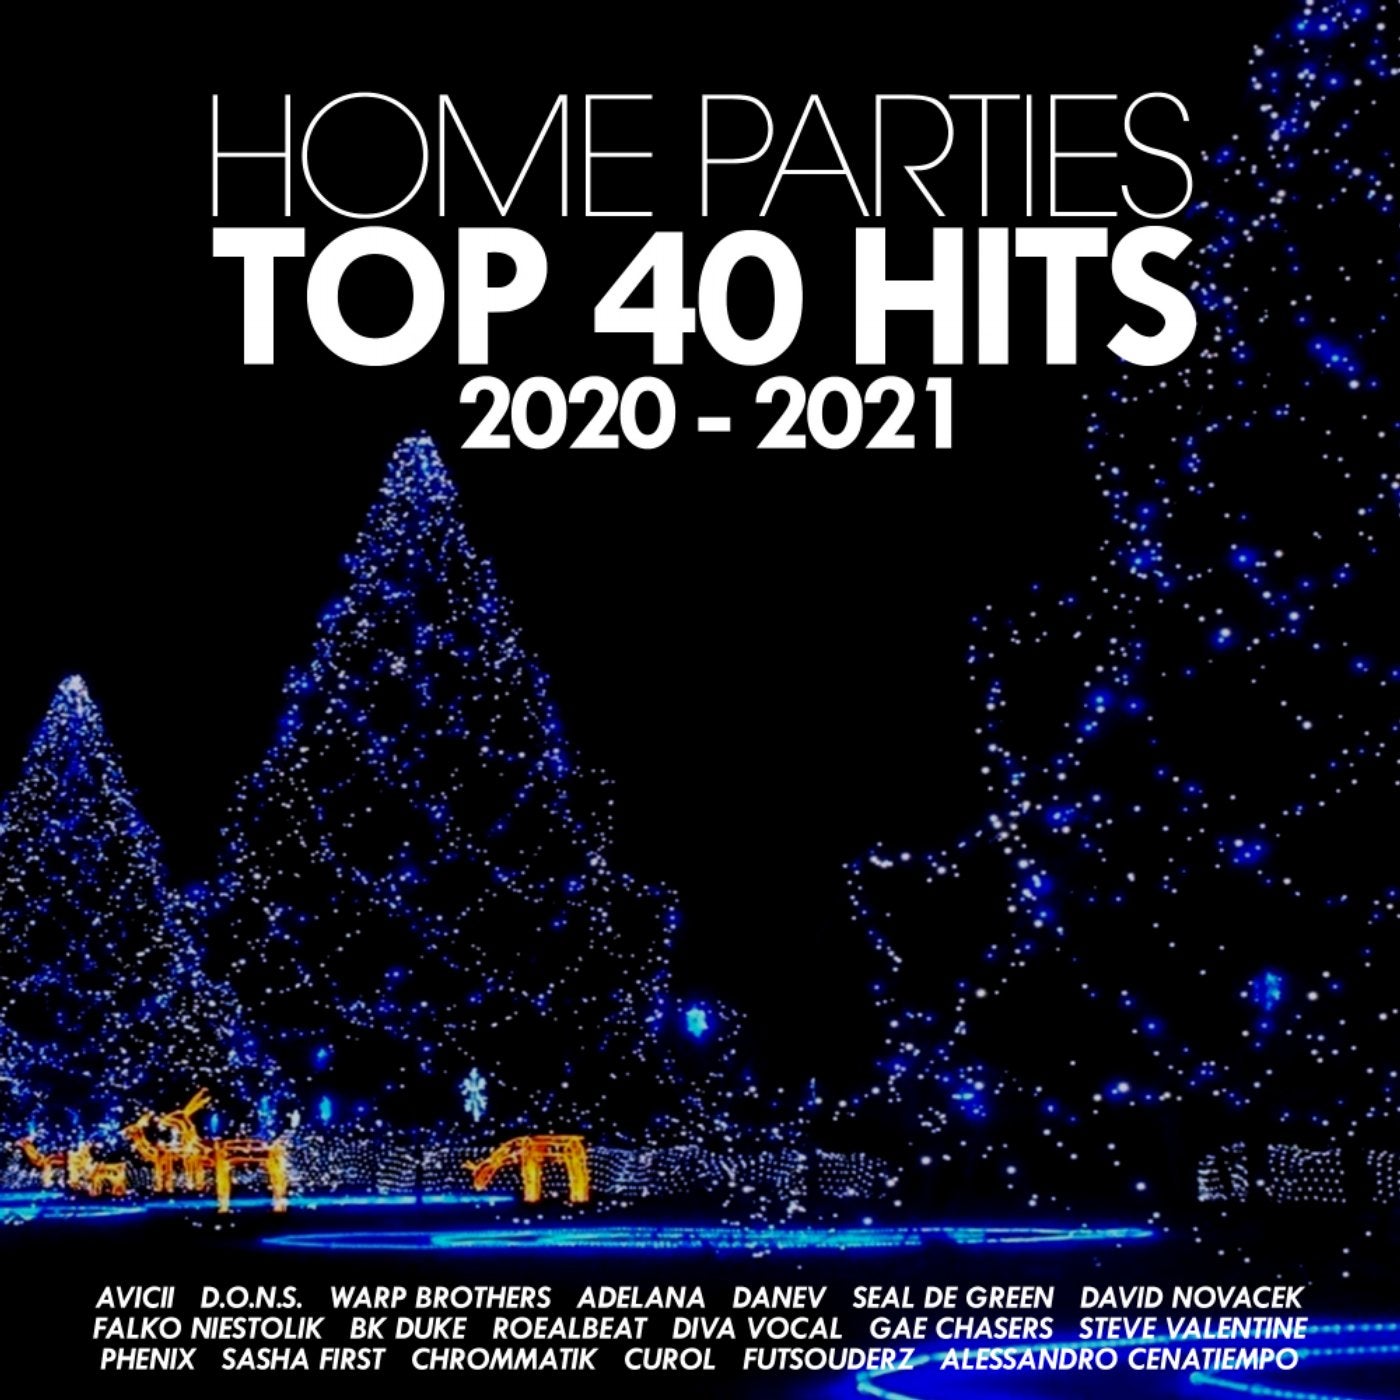 Home Parties Top 40 Hits